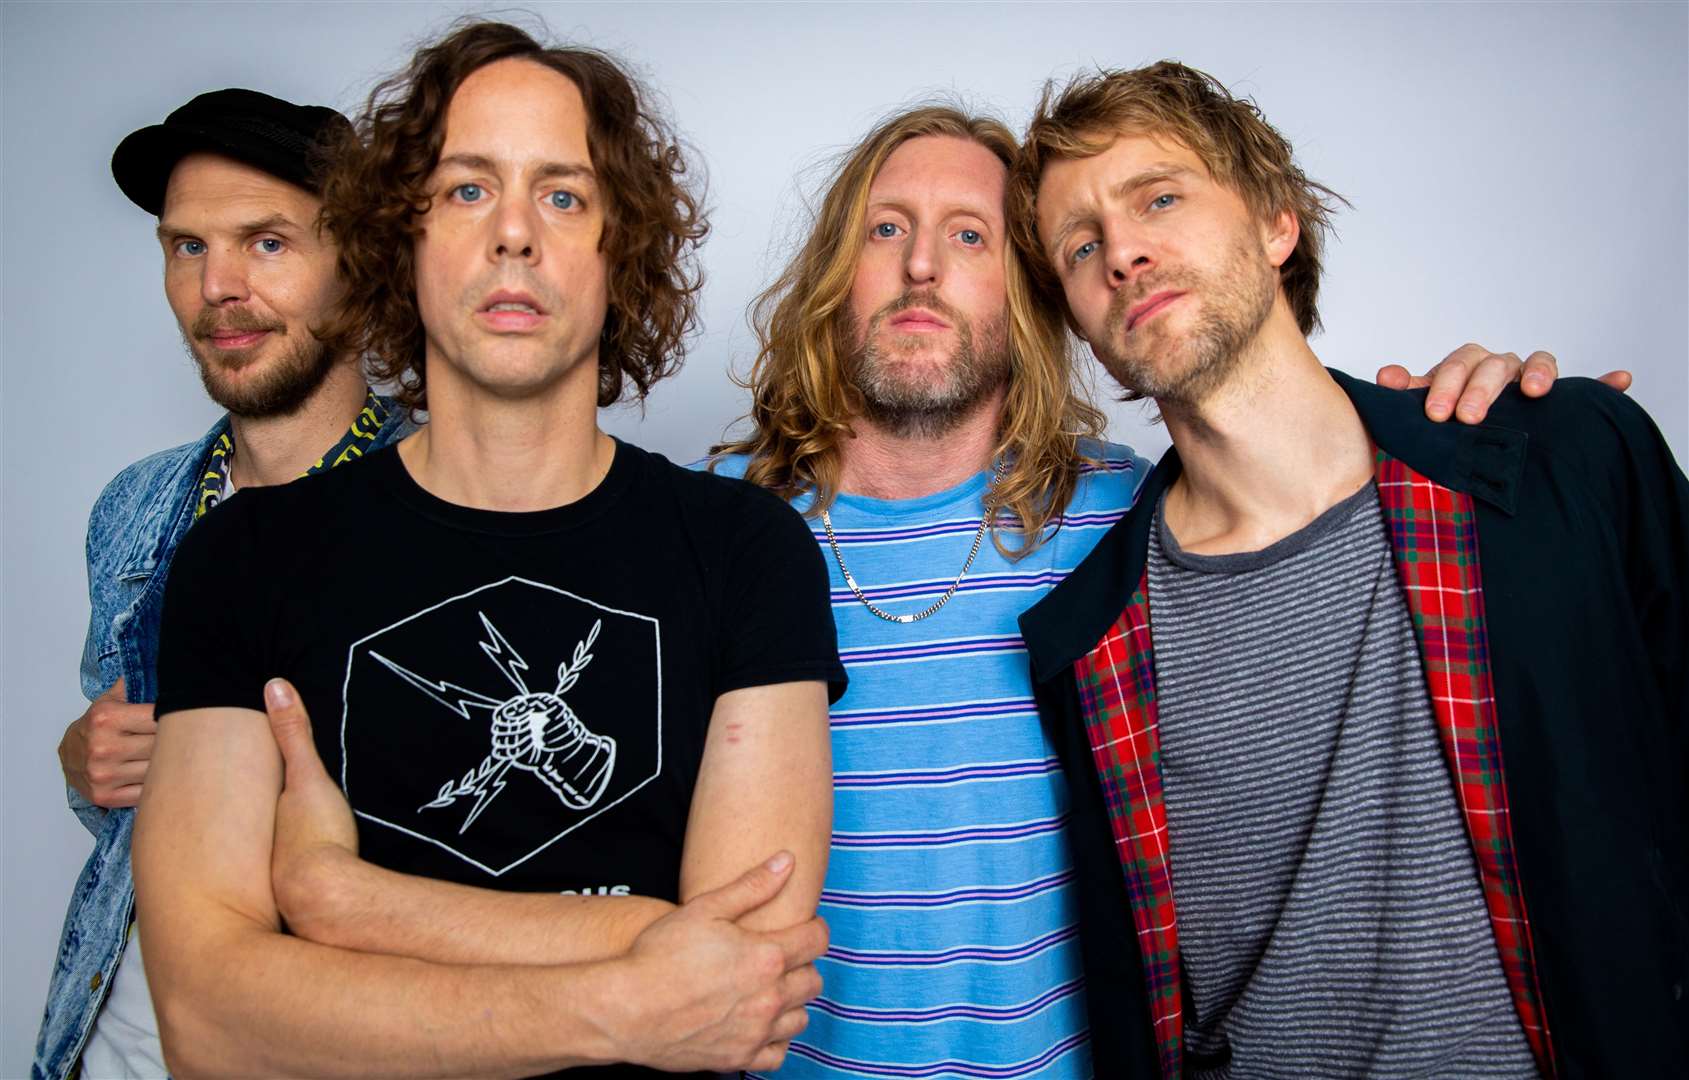 Razorlight will be performing at a Kent hotel this August